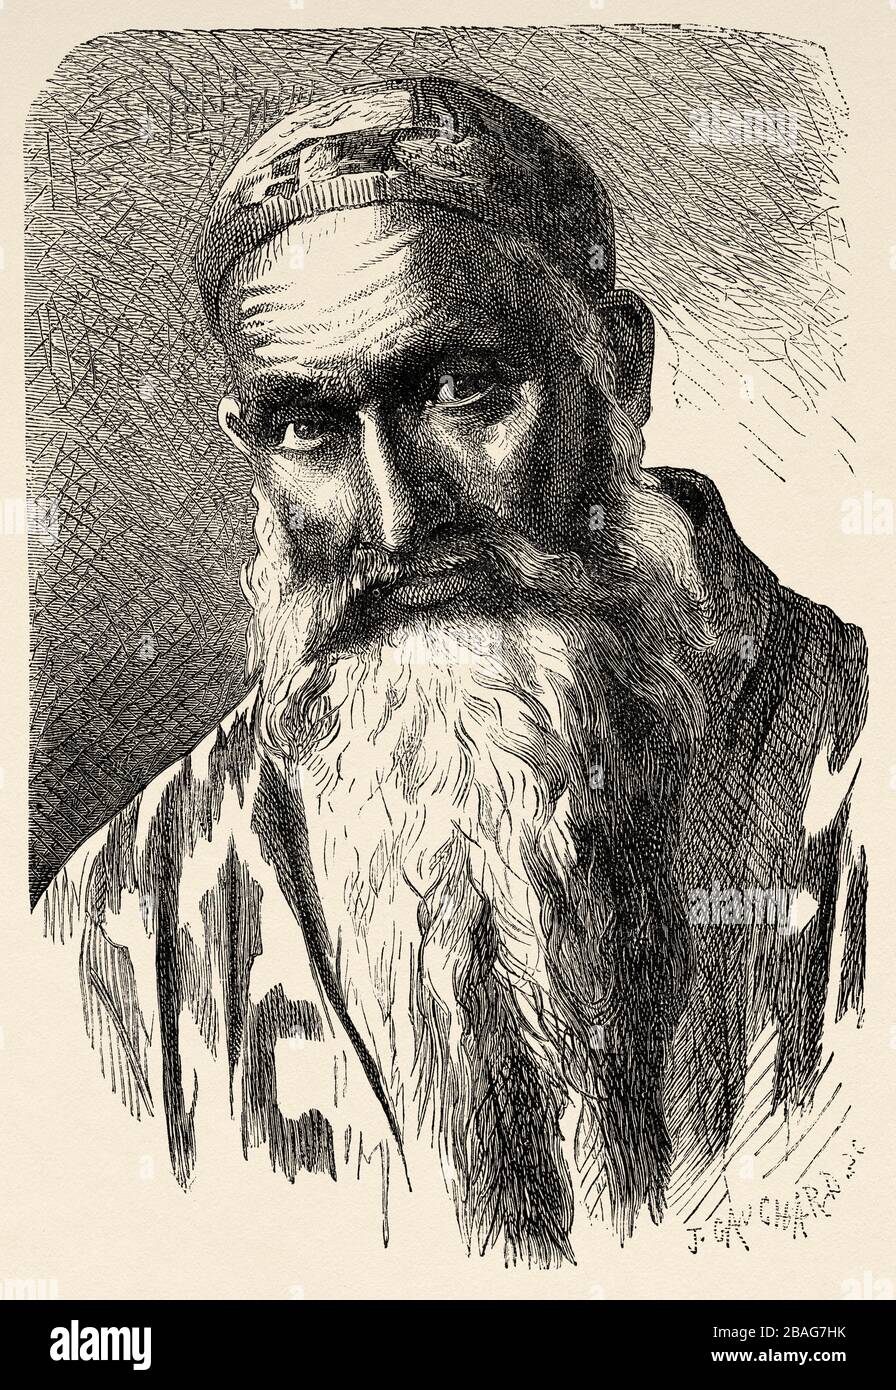 Portrait of an Arab man with a long beard, from Travels in central Asia 1863 by Armin Vambery. Old engraving El Mundo en la Mano 1878 Stock Photo